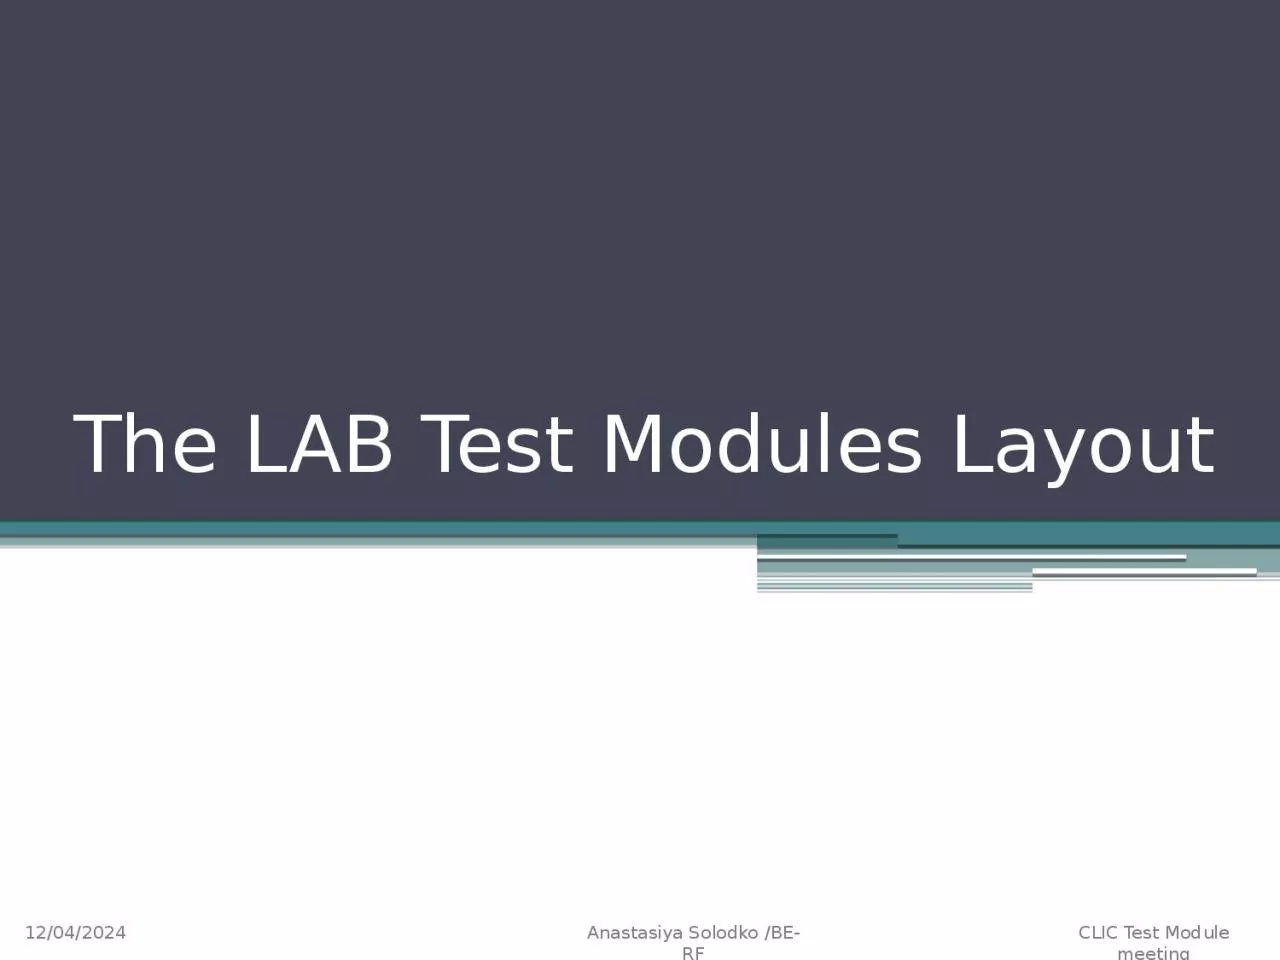 The LAB Test Modules Layout